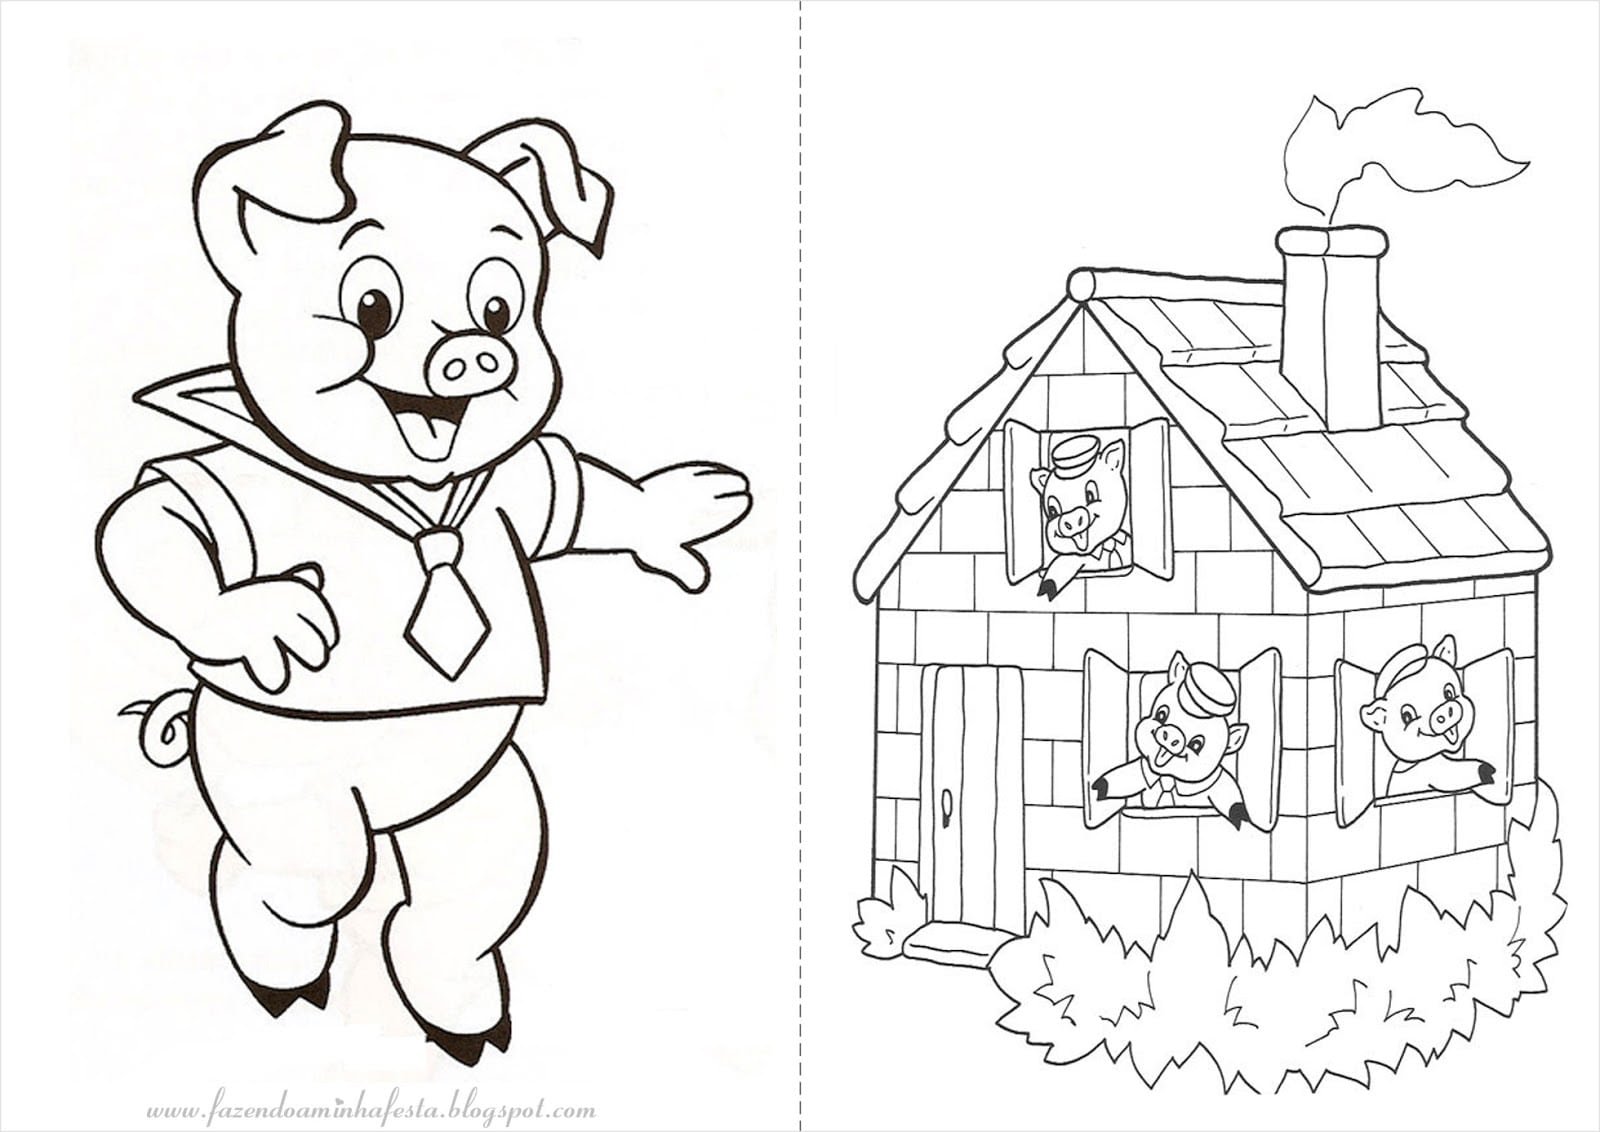 Fascinating coloring 3 pigs for kids